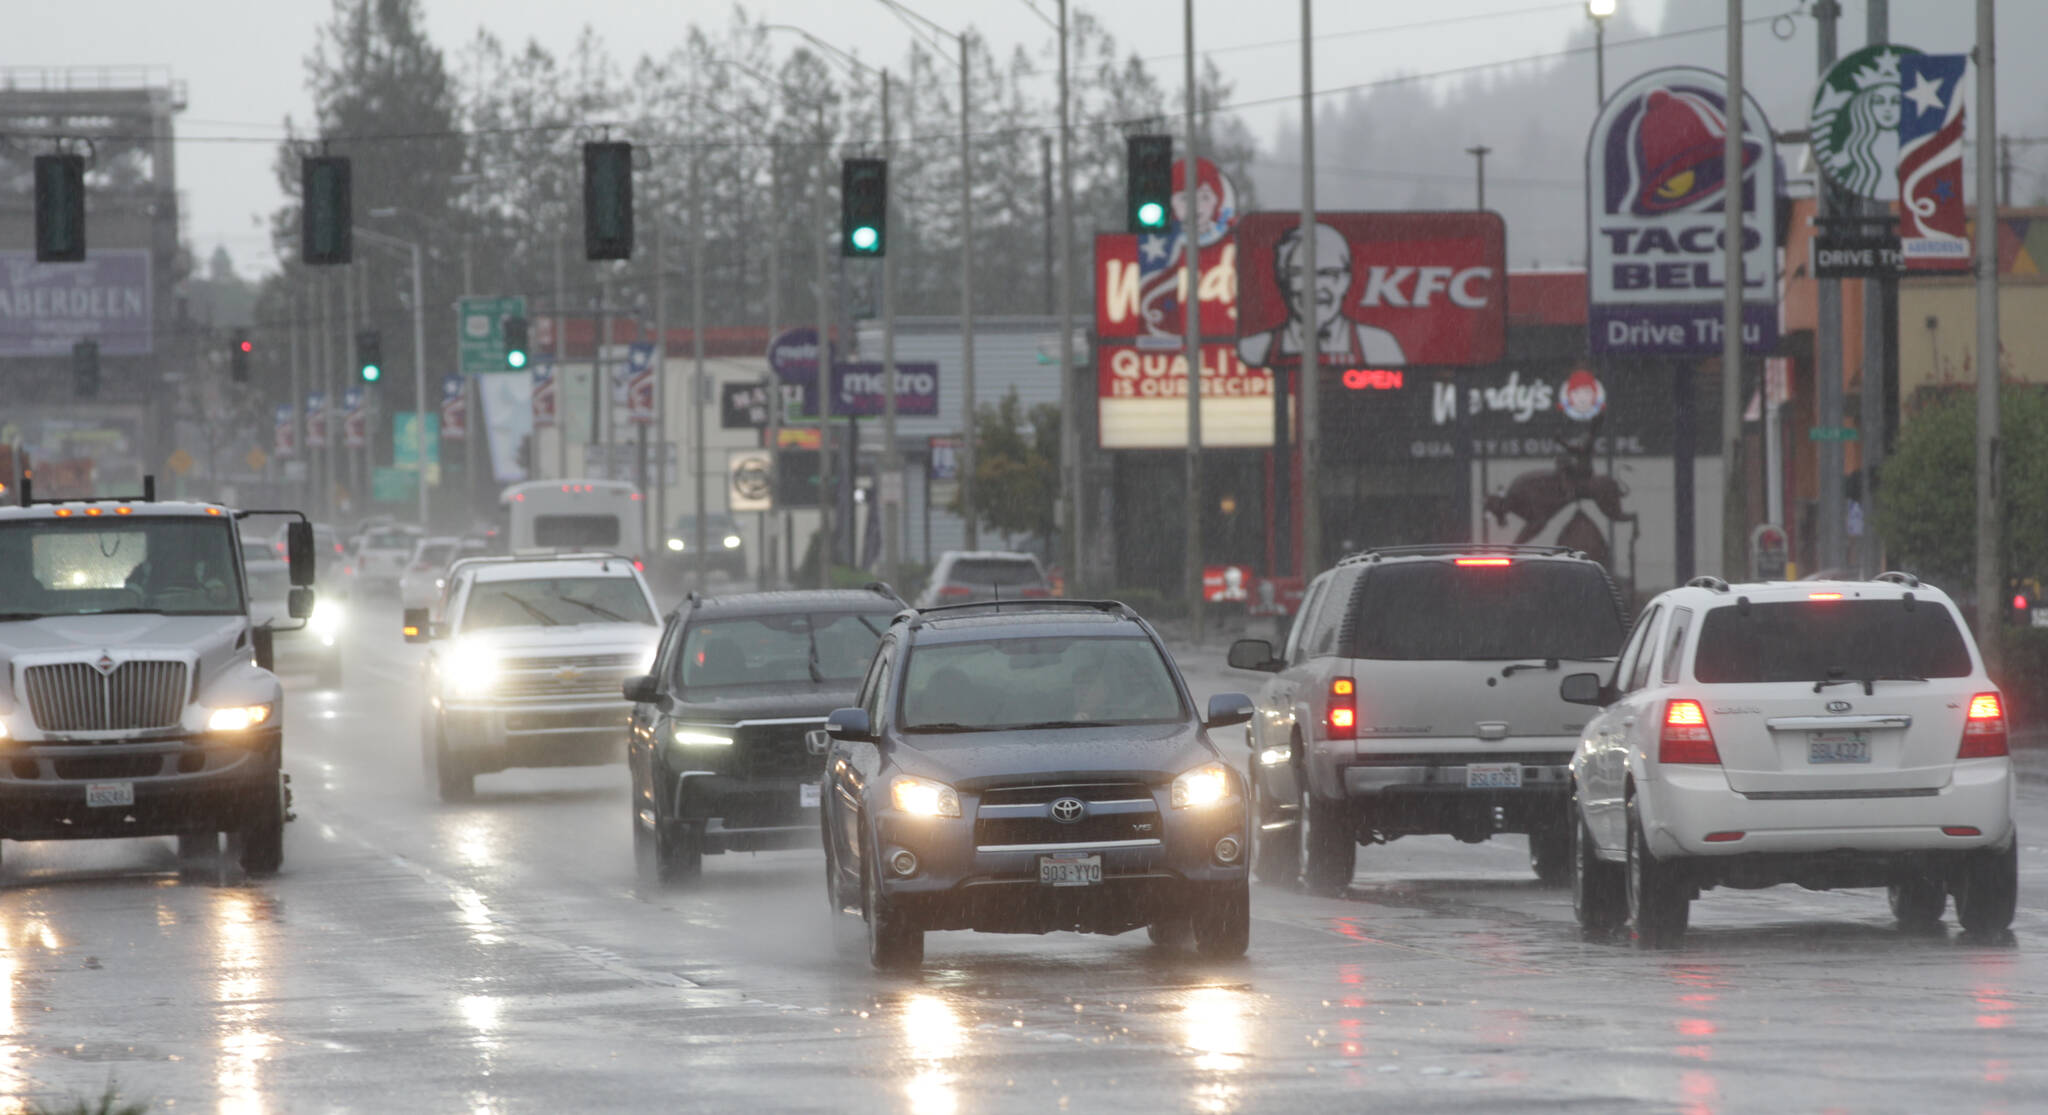 As the rain returns and the cold draws in close, local organizations remind Harbor residents to have the safest time they can during the dark months. (Michael S. Lockett / The Daily World)